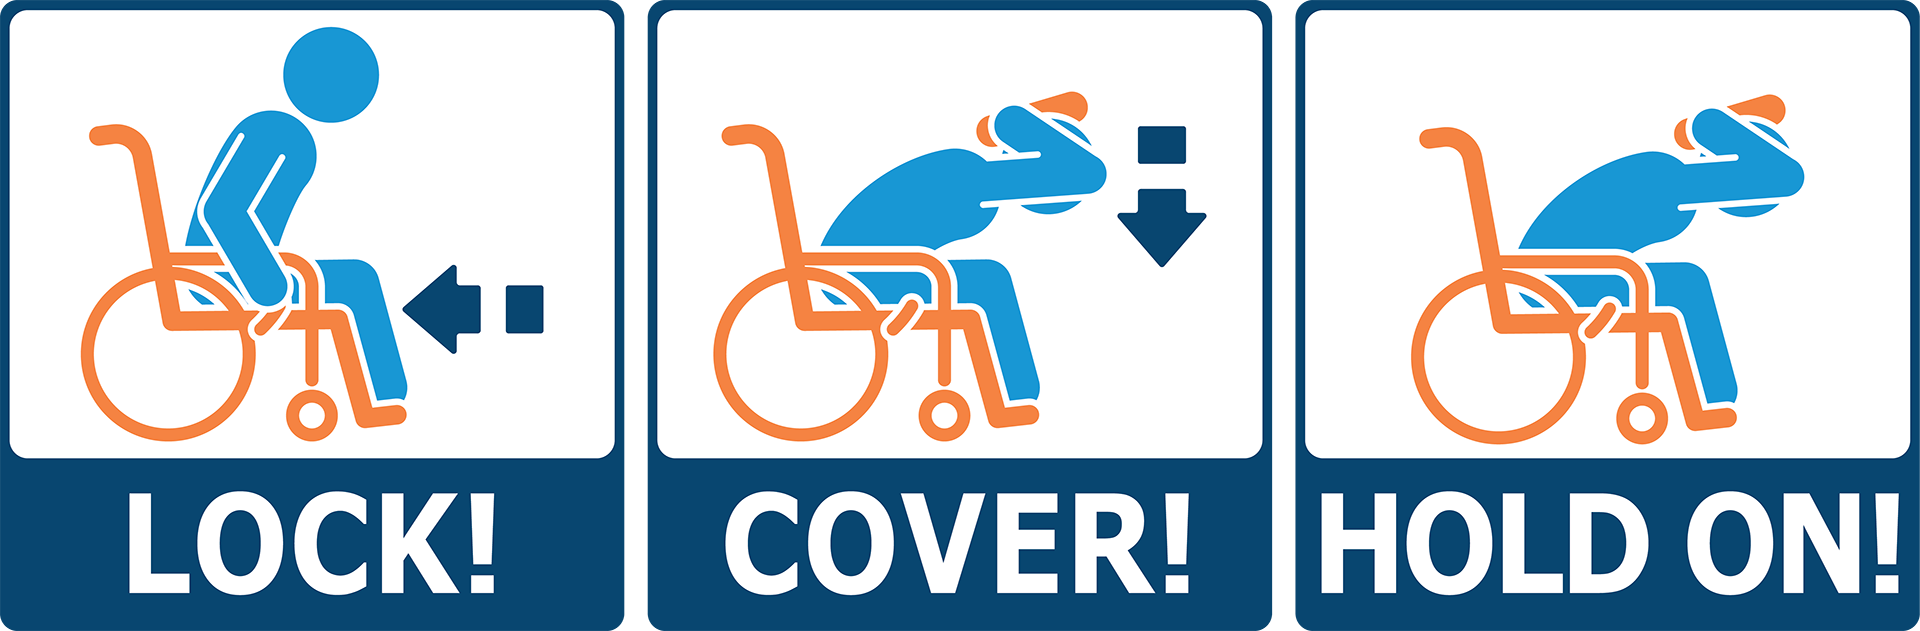 Wheelchair - Lock, Cover, Hold On Graphic